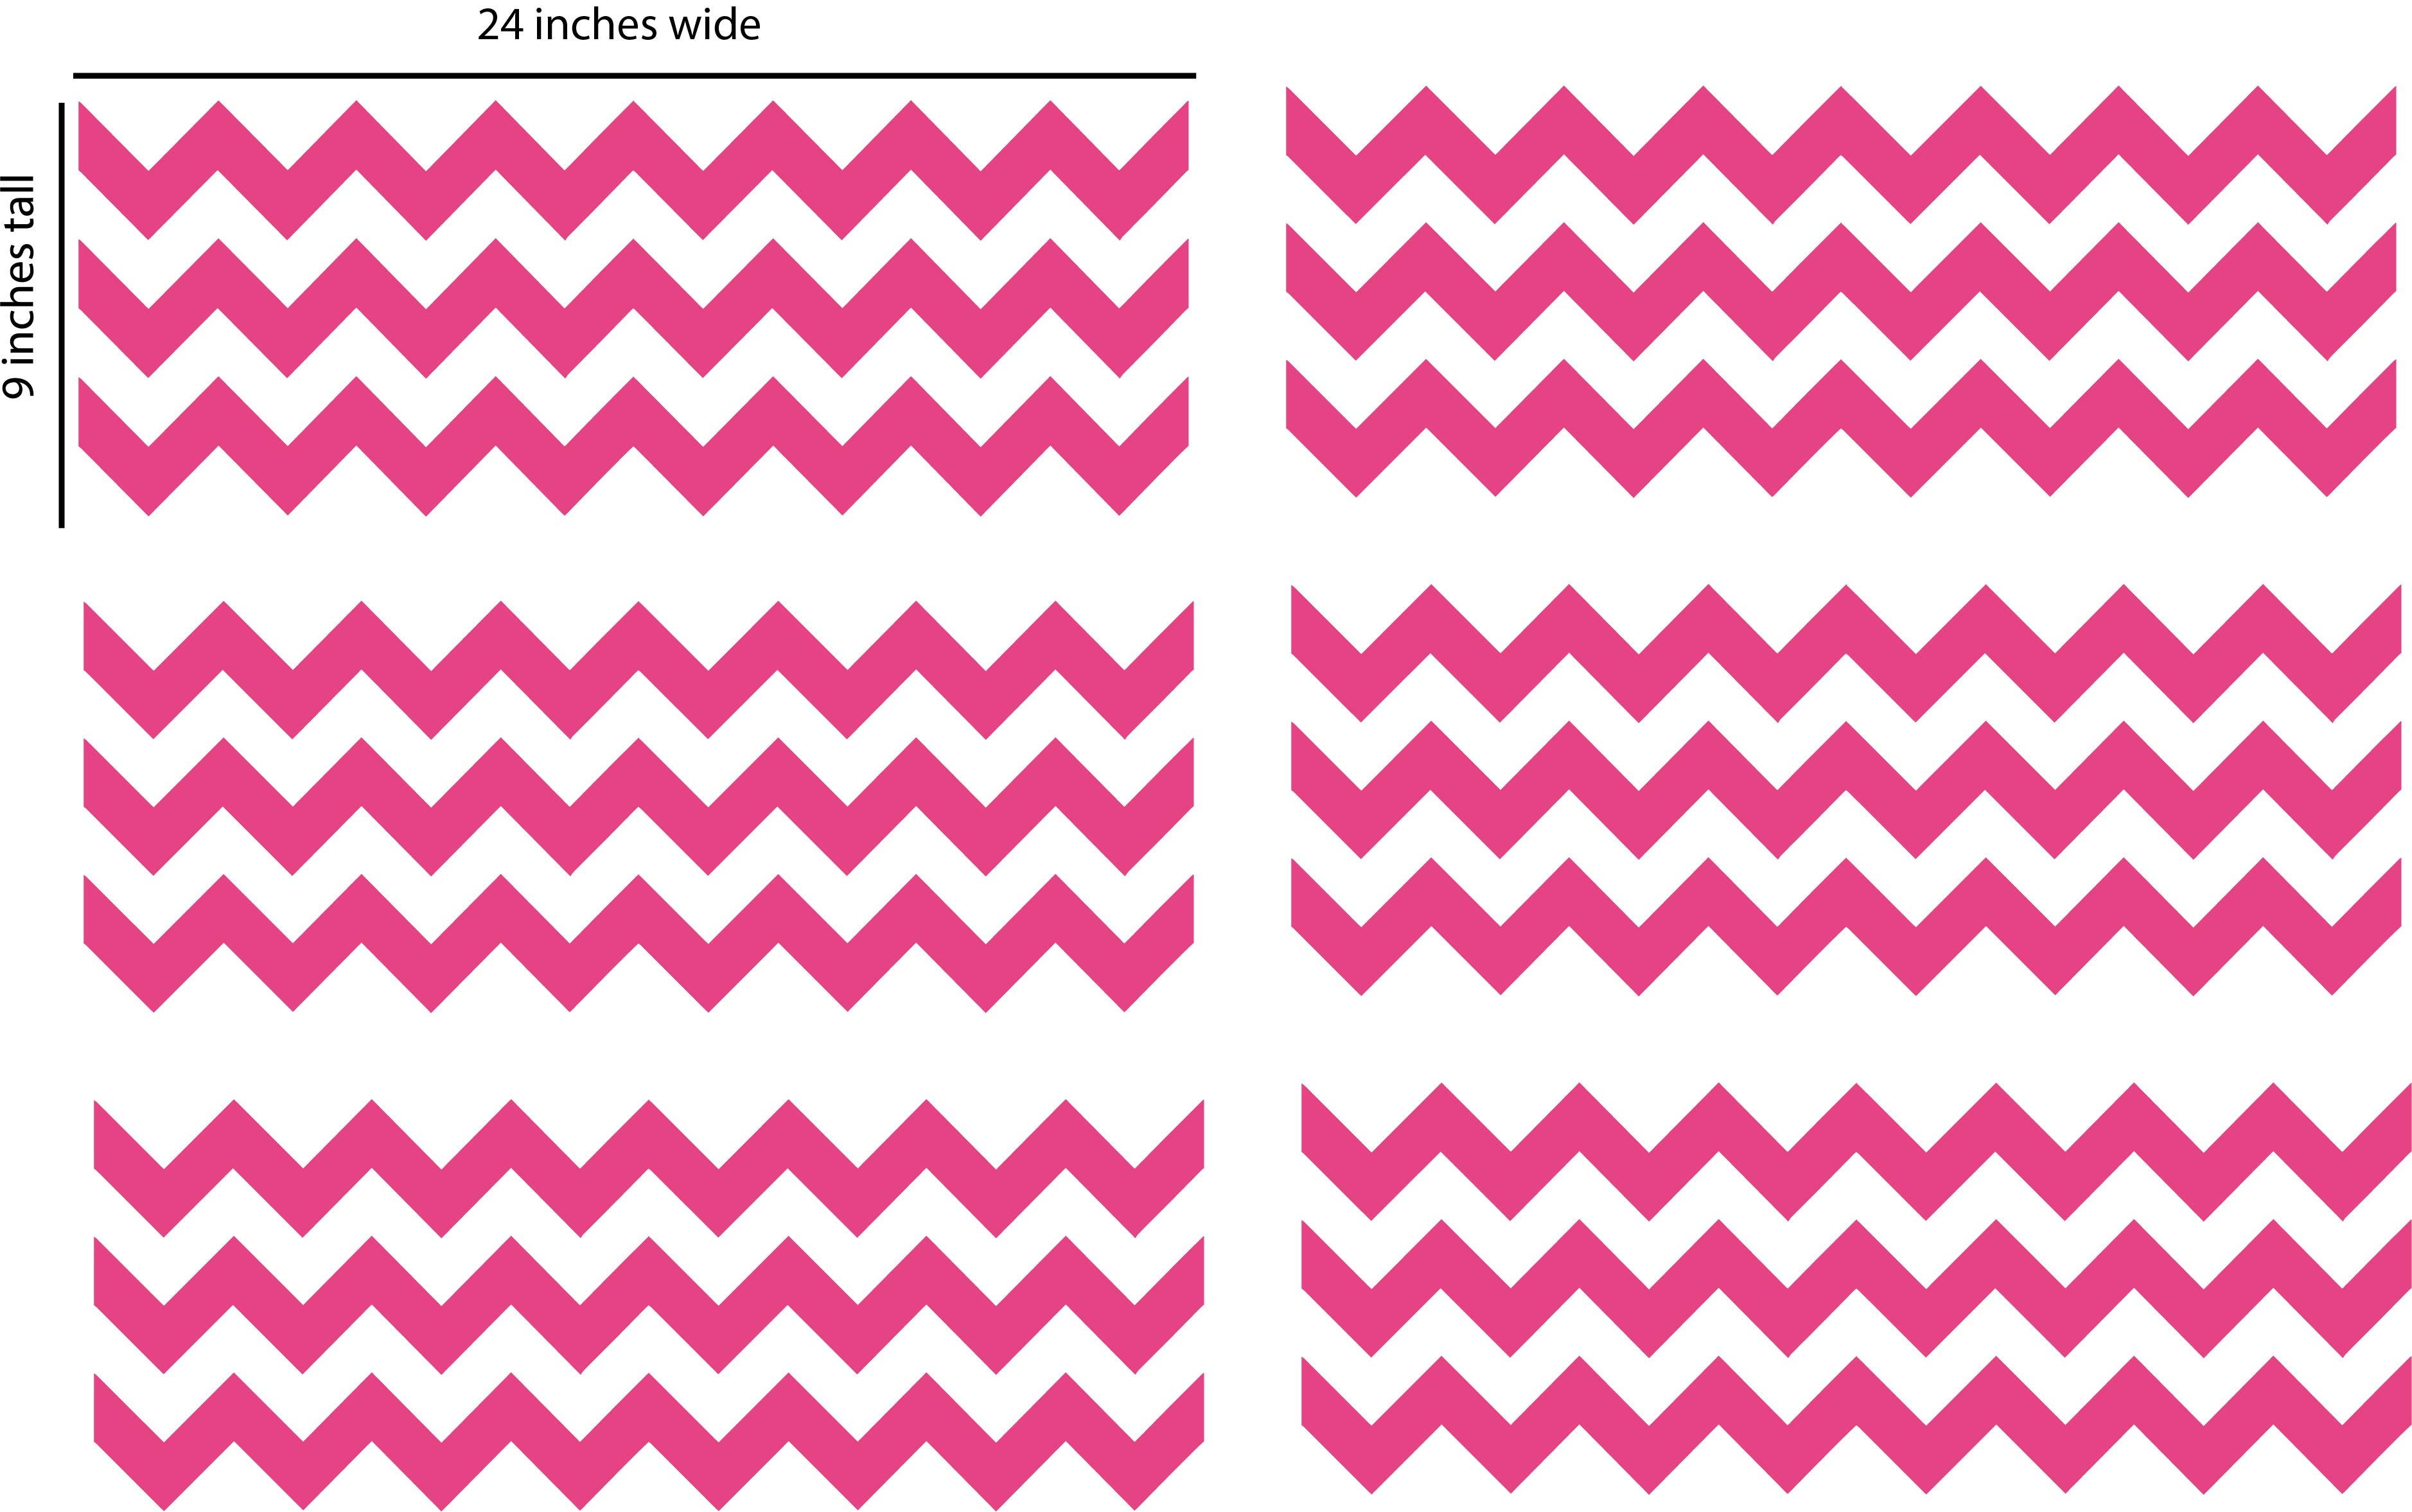 Chevron Wall Decal Border Add A With This